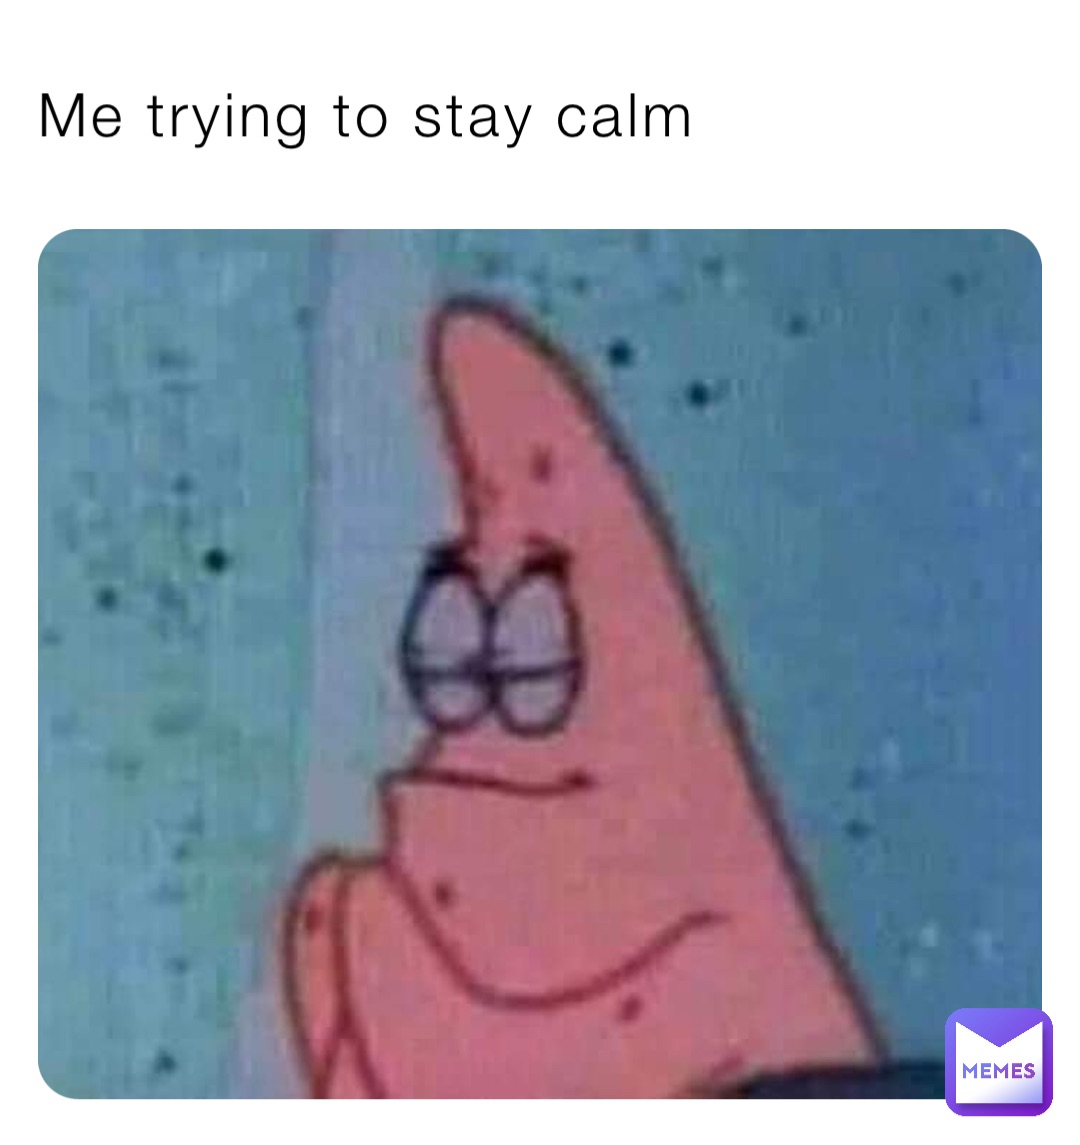 Me trying to stay calm